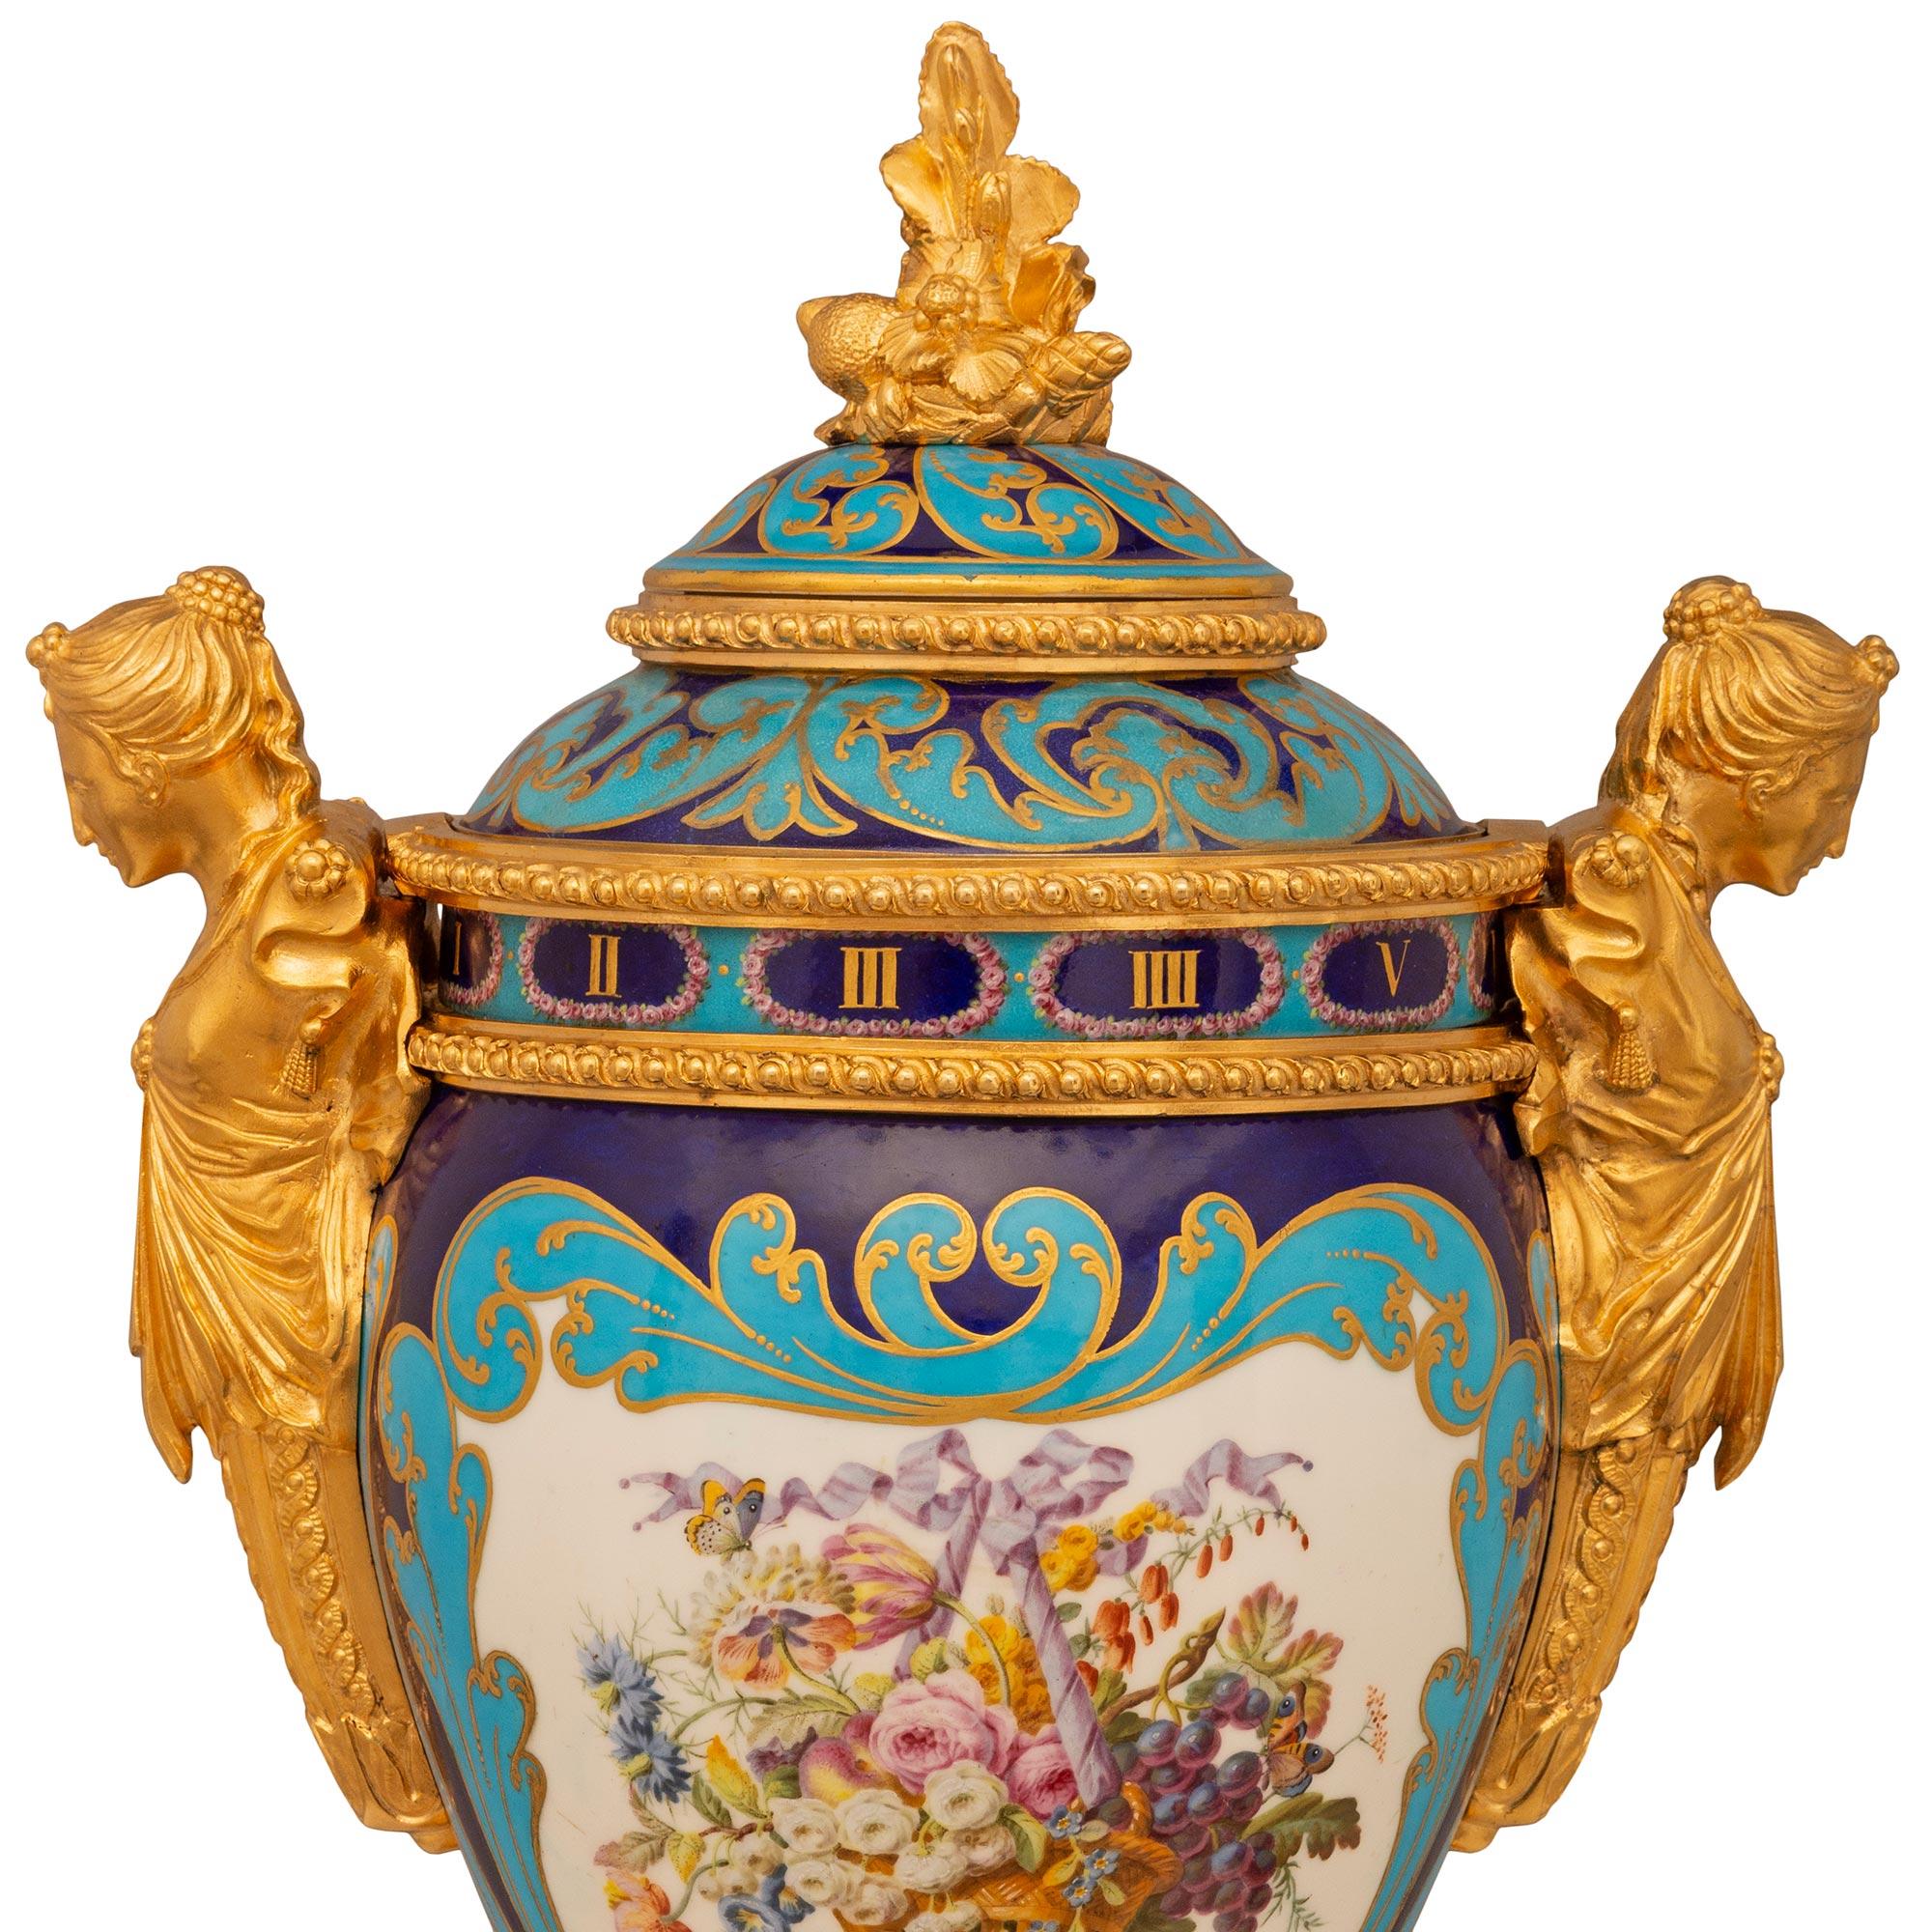 A sensational and high quality French 19th century Louis XVI st. Sévres porcelain and Ormolu annular clock. The clock is raised by a square Ormolu base with a Coeur de Rai border design above ball supports. The square pedestal has four individual